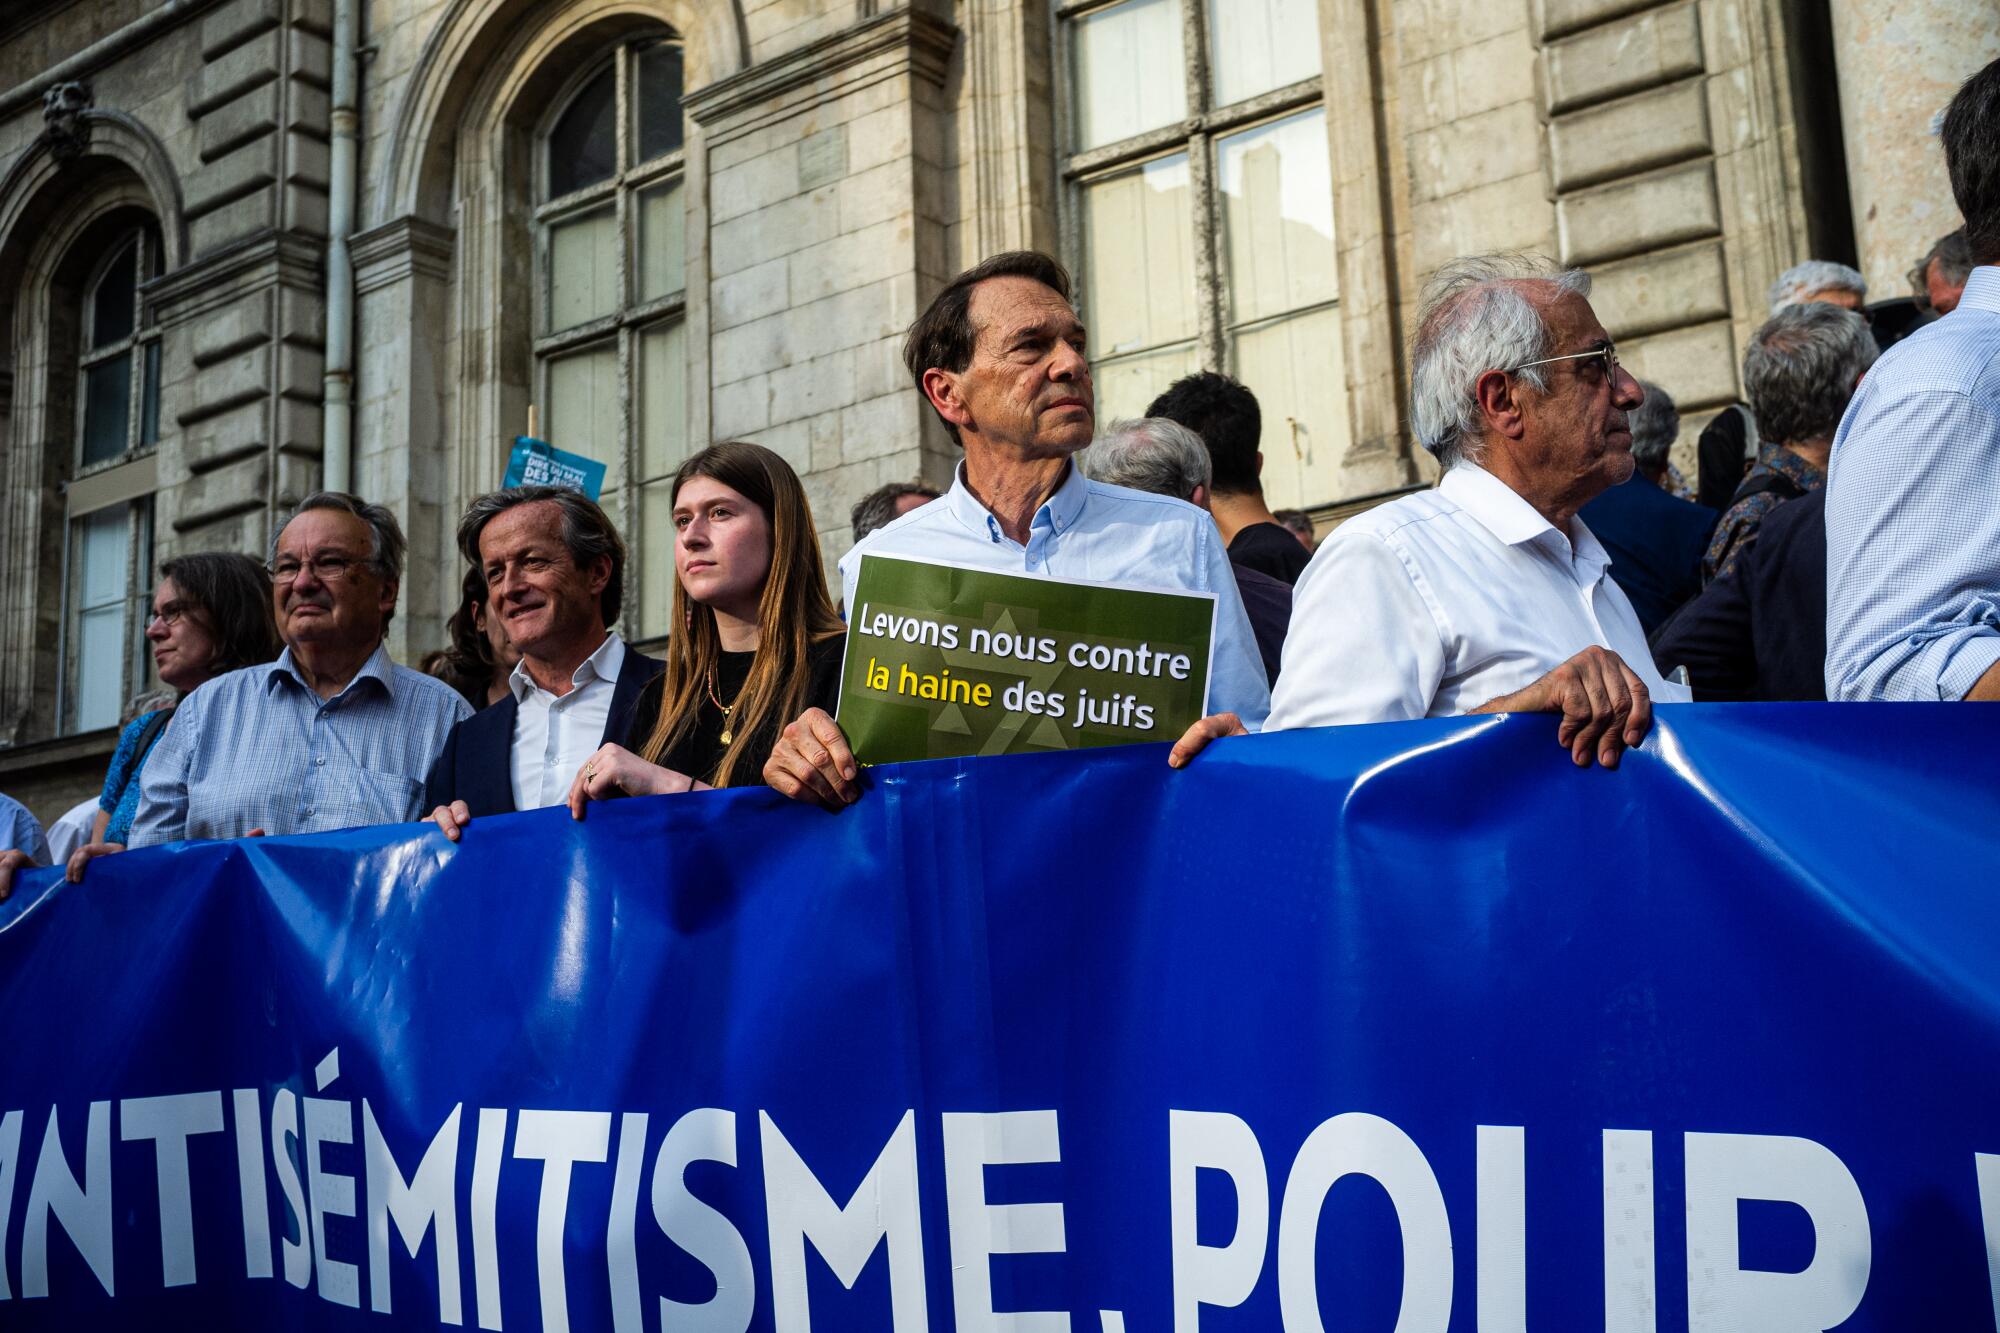 Protesters stand behind a banner, one holding a sign reading, "Let's rise against the hate of Jews," in Lyon, France.